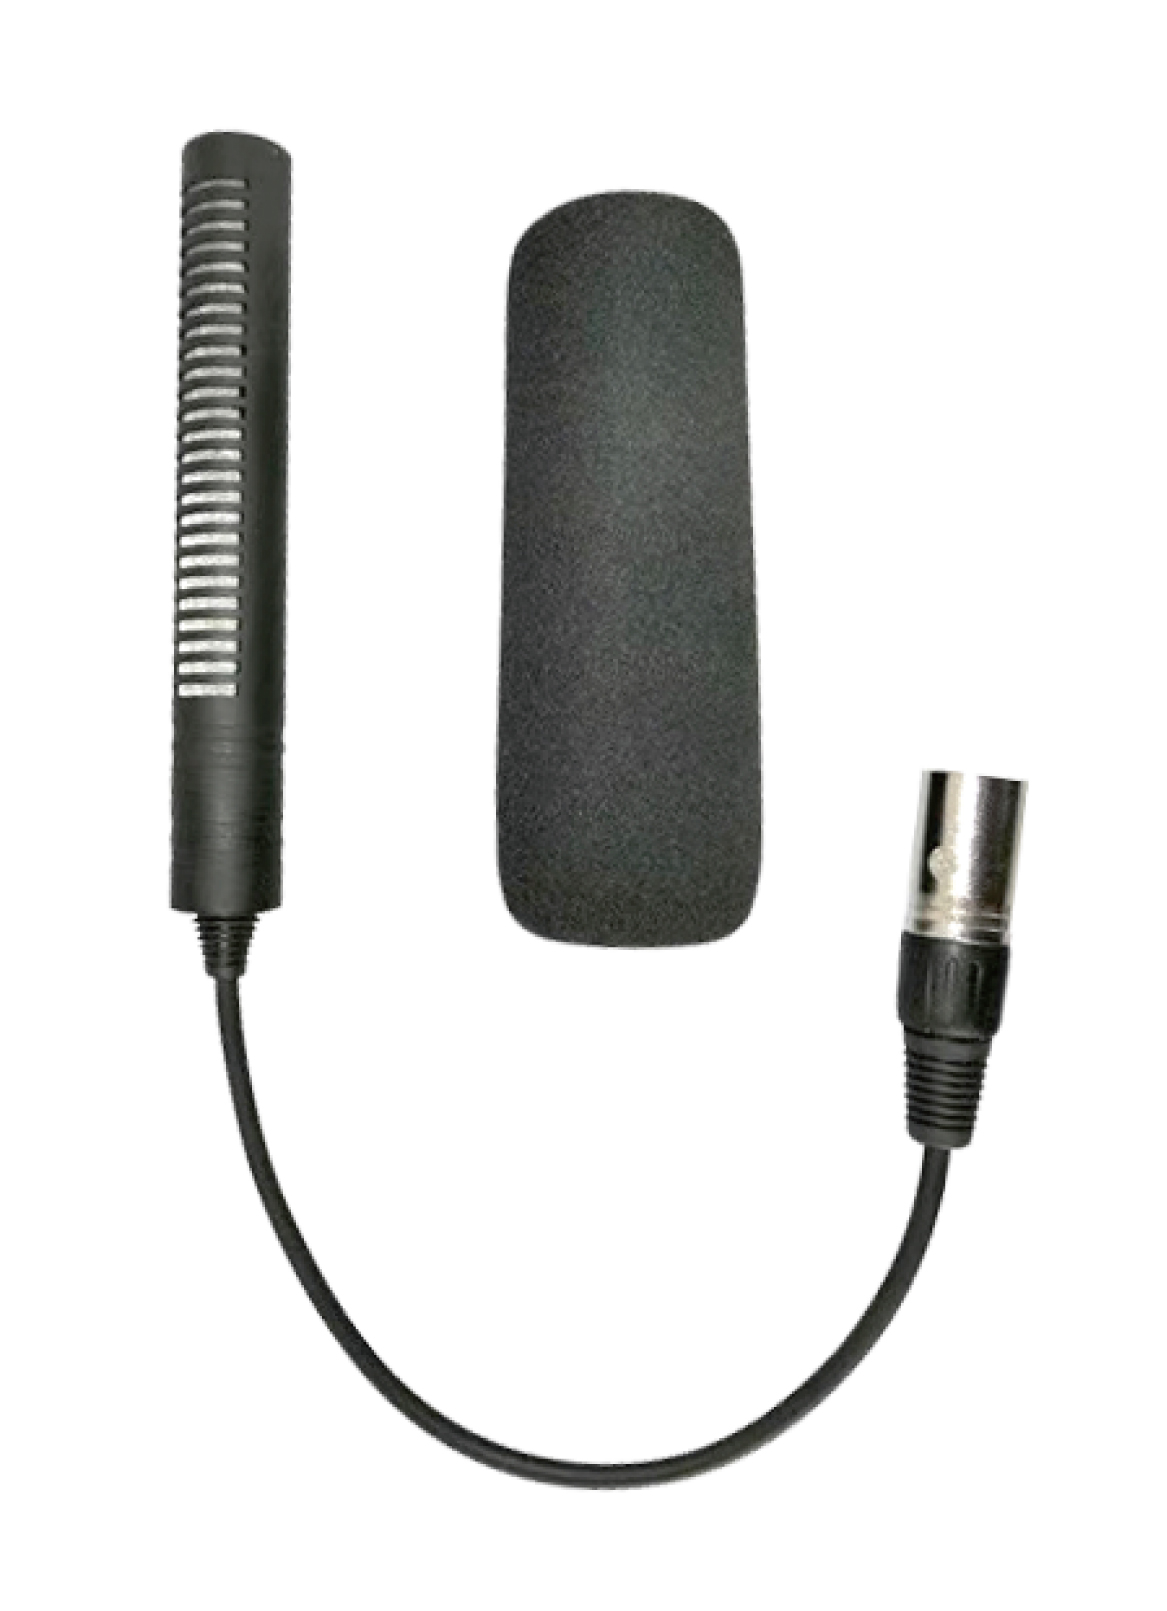 microphone tester